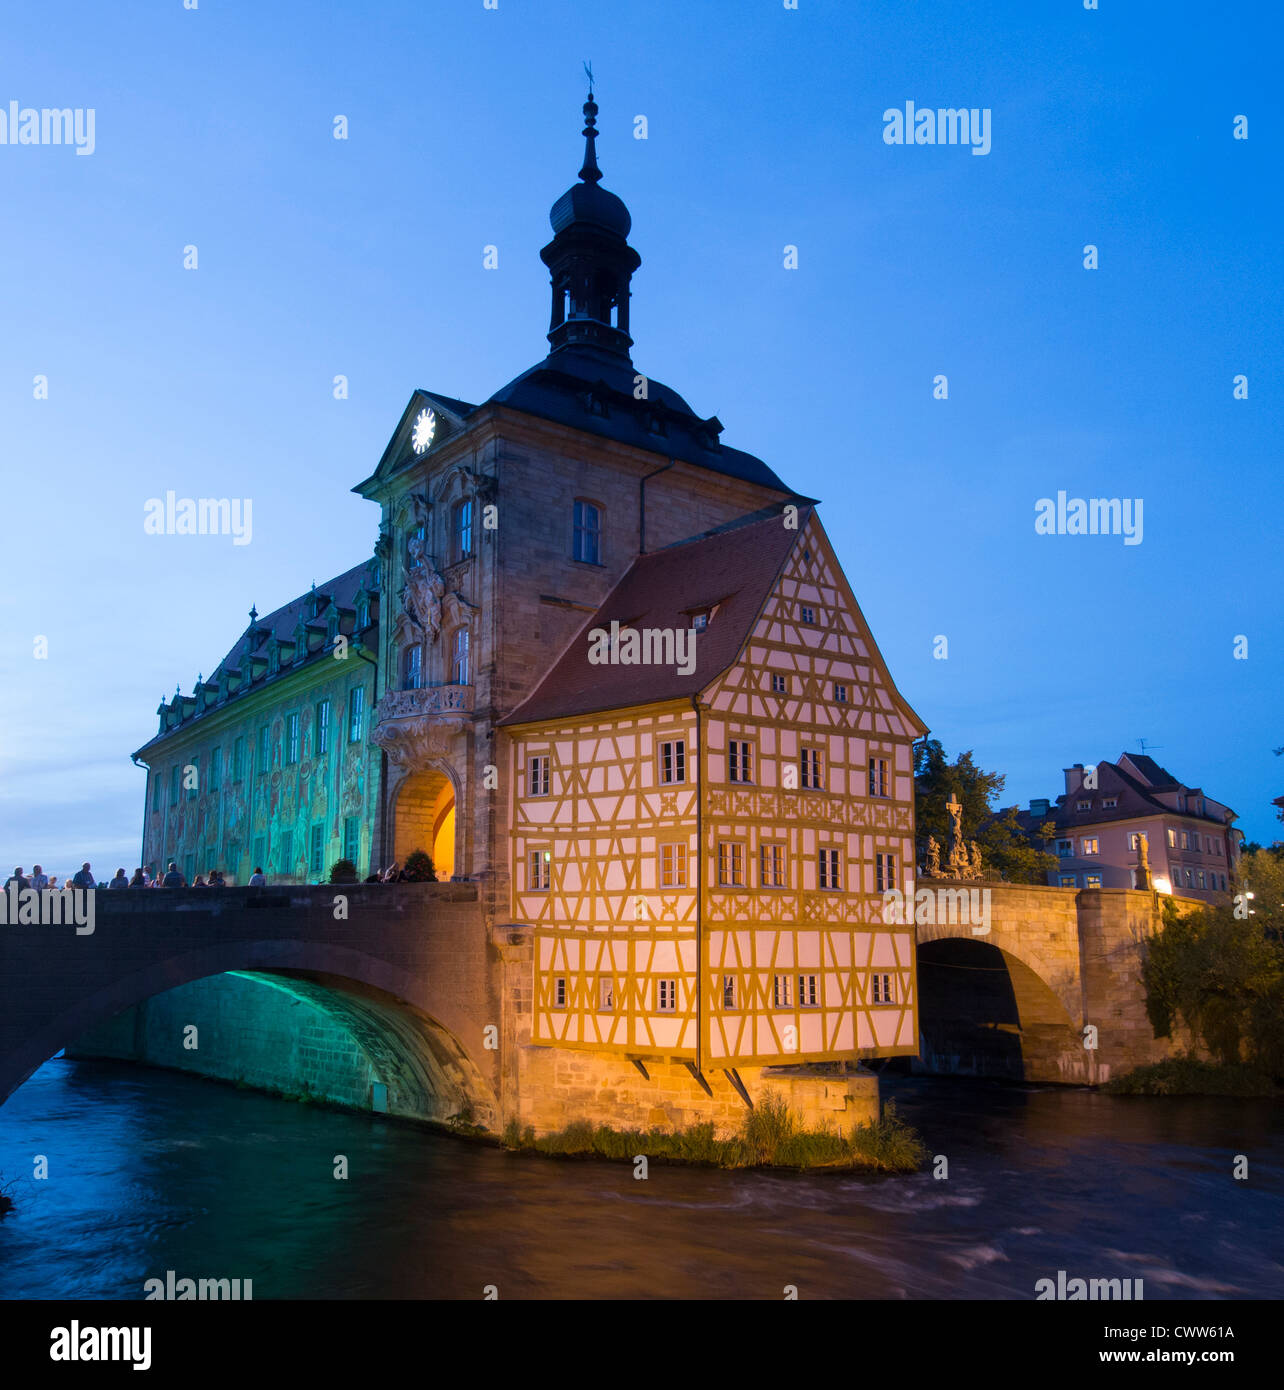 Old town hall or Altes Rathaus in the evening in Bamberg Bavaria Germany Stock Photo